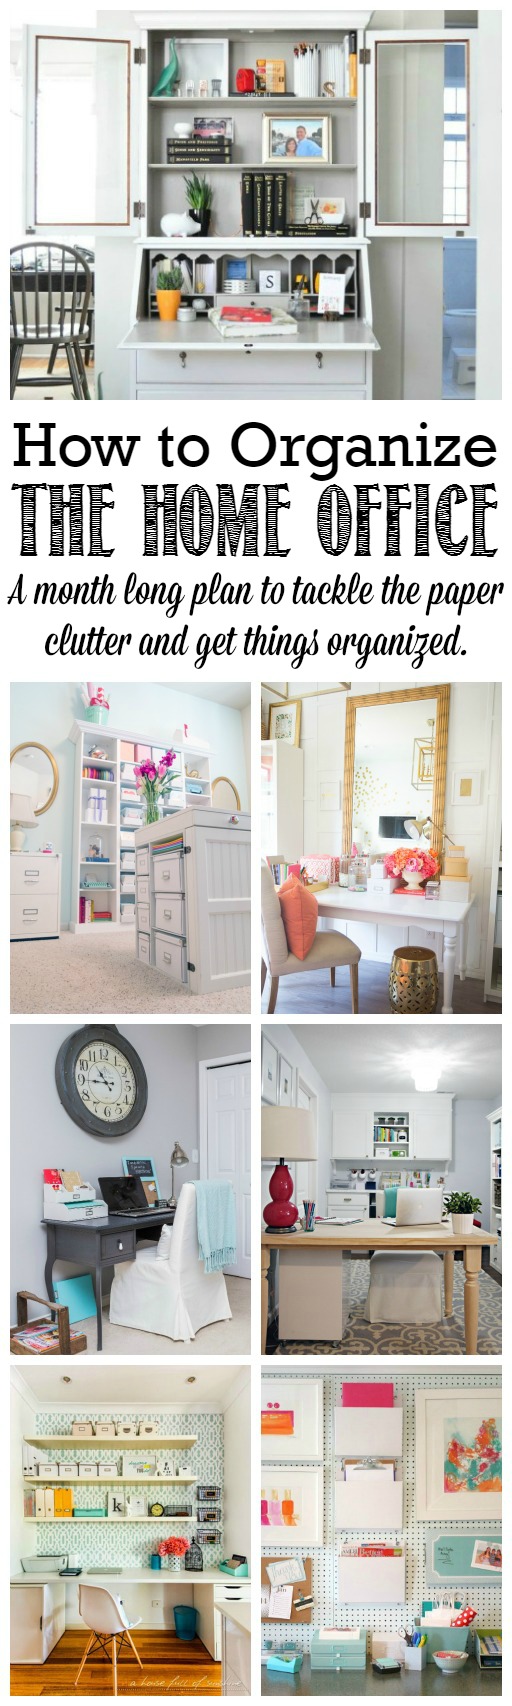 9 Steps to a More Organized Office